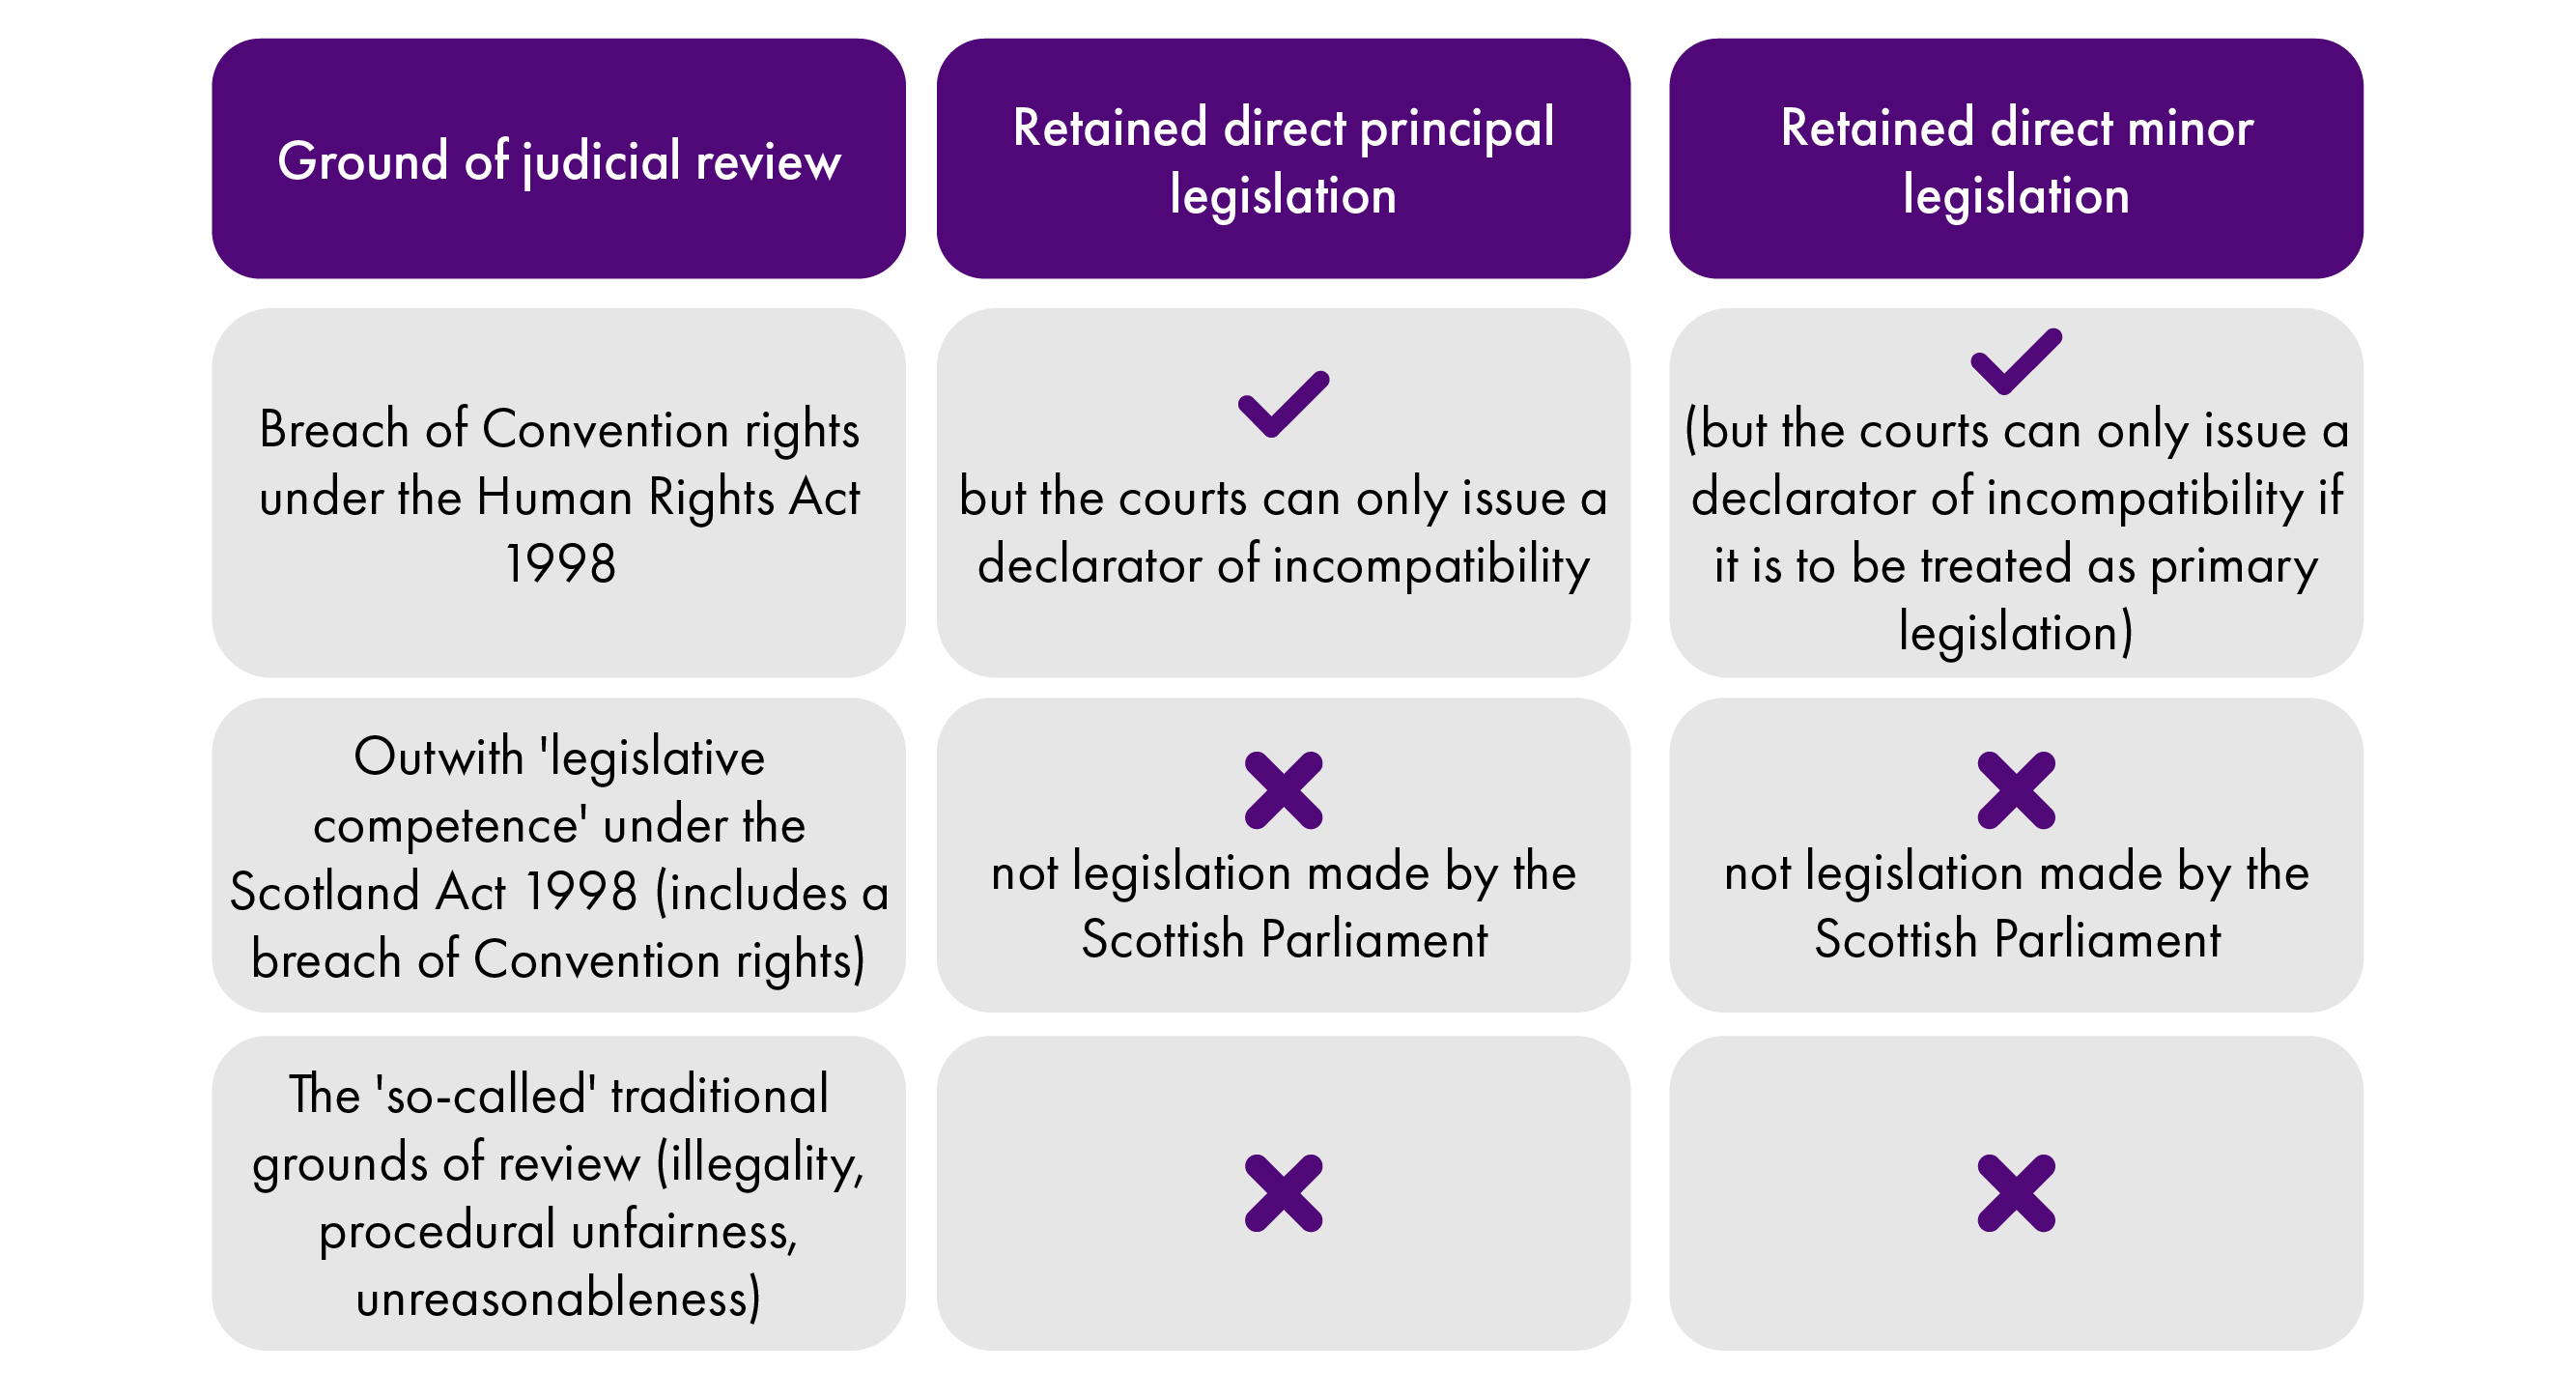 This is an infographic showing the scope for a judicial review challenge to EU direct legislation, according to the different grounds of review and the type of legislation at issue Overall, an alleged breach of Convention rights under the Human Rights Act 1998 is the only ground of review possible in respect of (both types of) EU direct legislation.